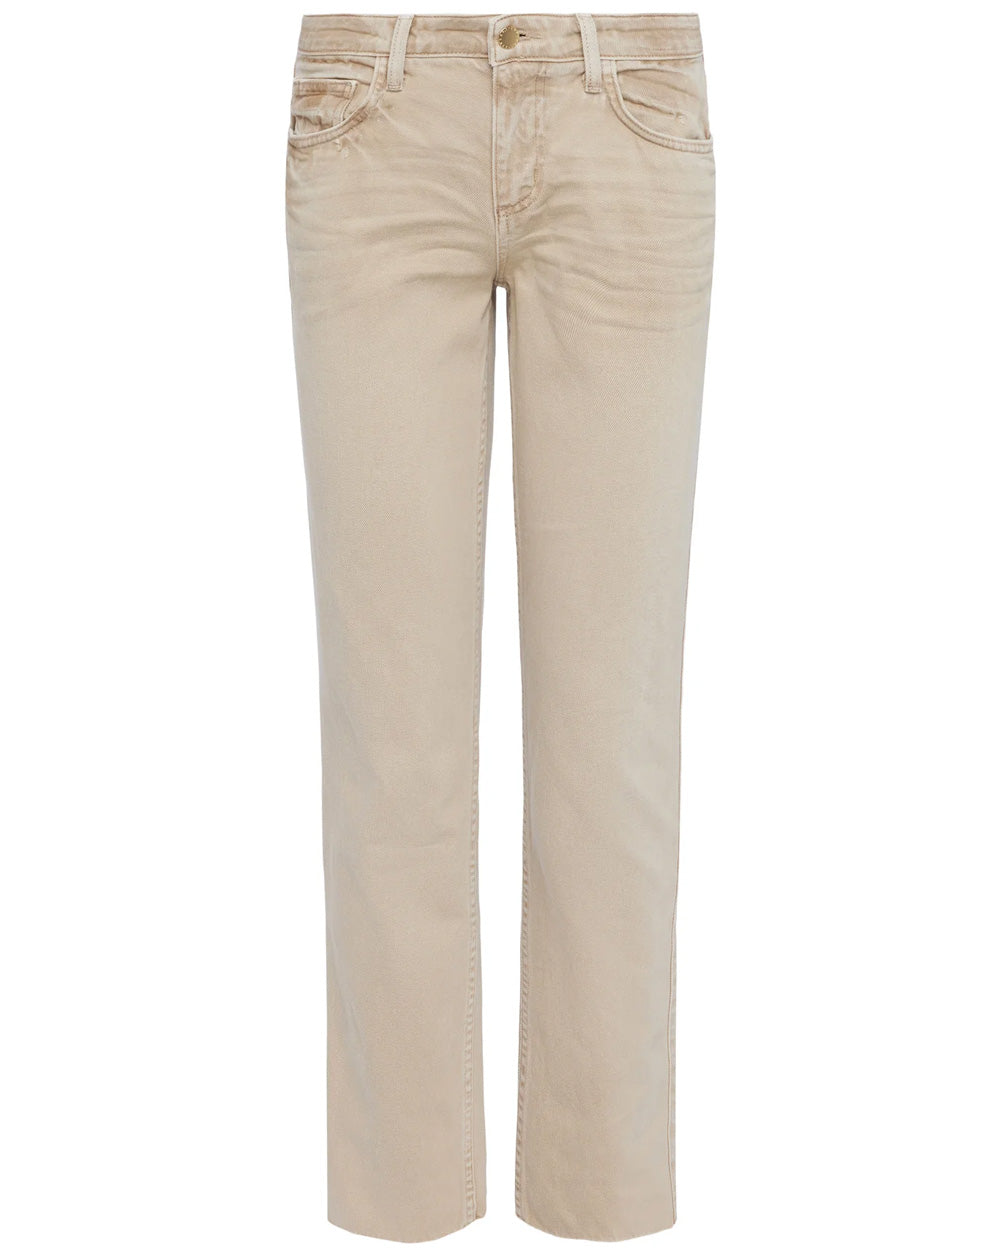 Milana Low Rise Stovepipe Jean in Sand Dune